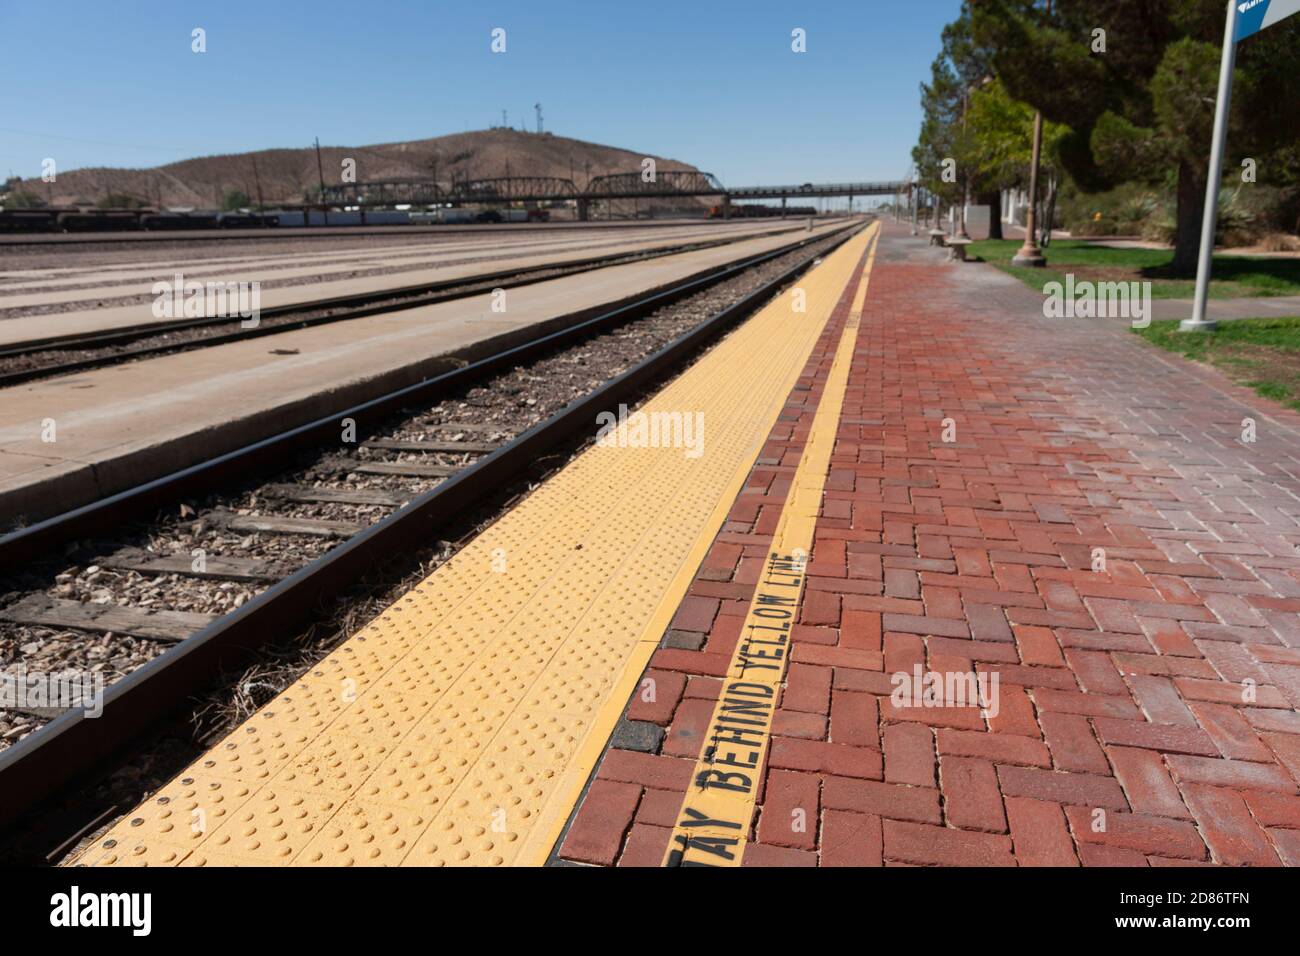 Long parralel merging train tracks and and platform converging into a blurred background. Stock Photo